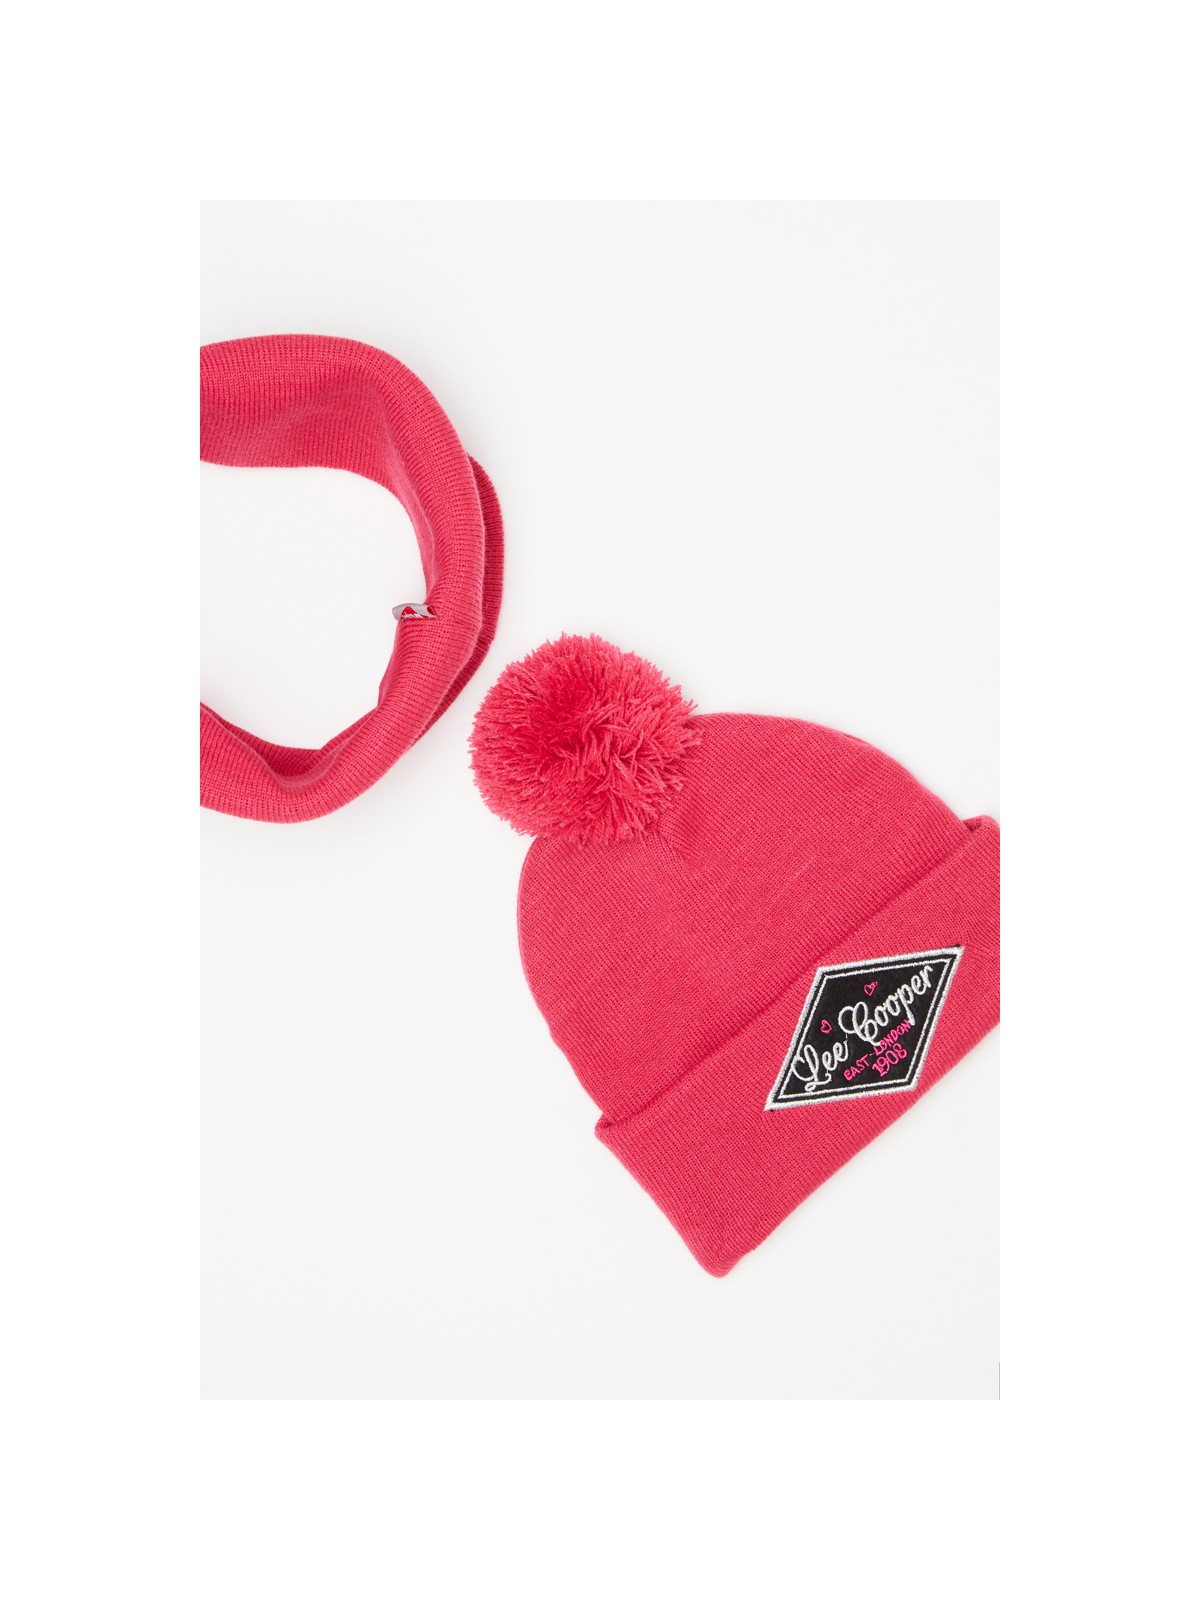 Lee Cooper Hat and neck scarf